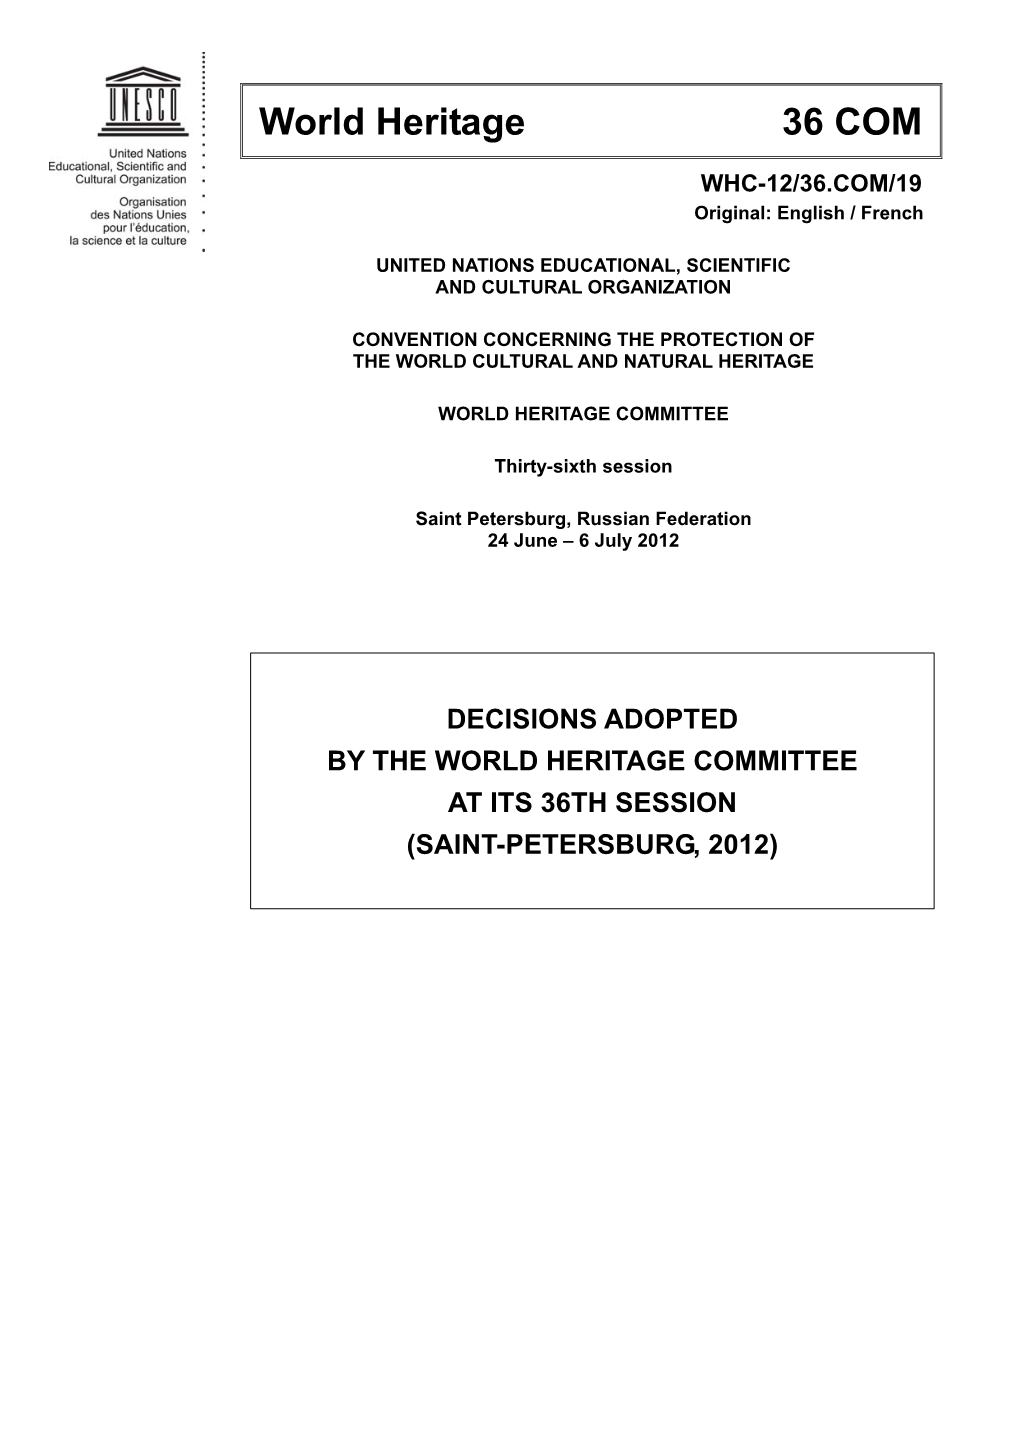 Decisions Adopted by the World Heritage Committee at Its 36Th Session (Saint-Petersburg, 2012)